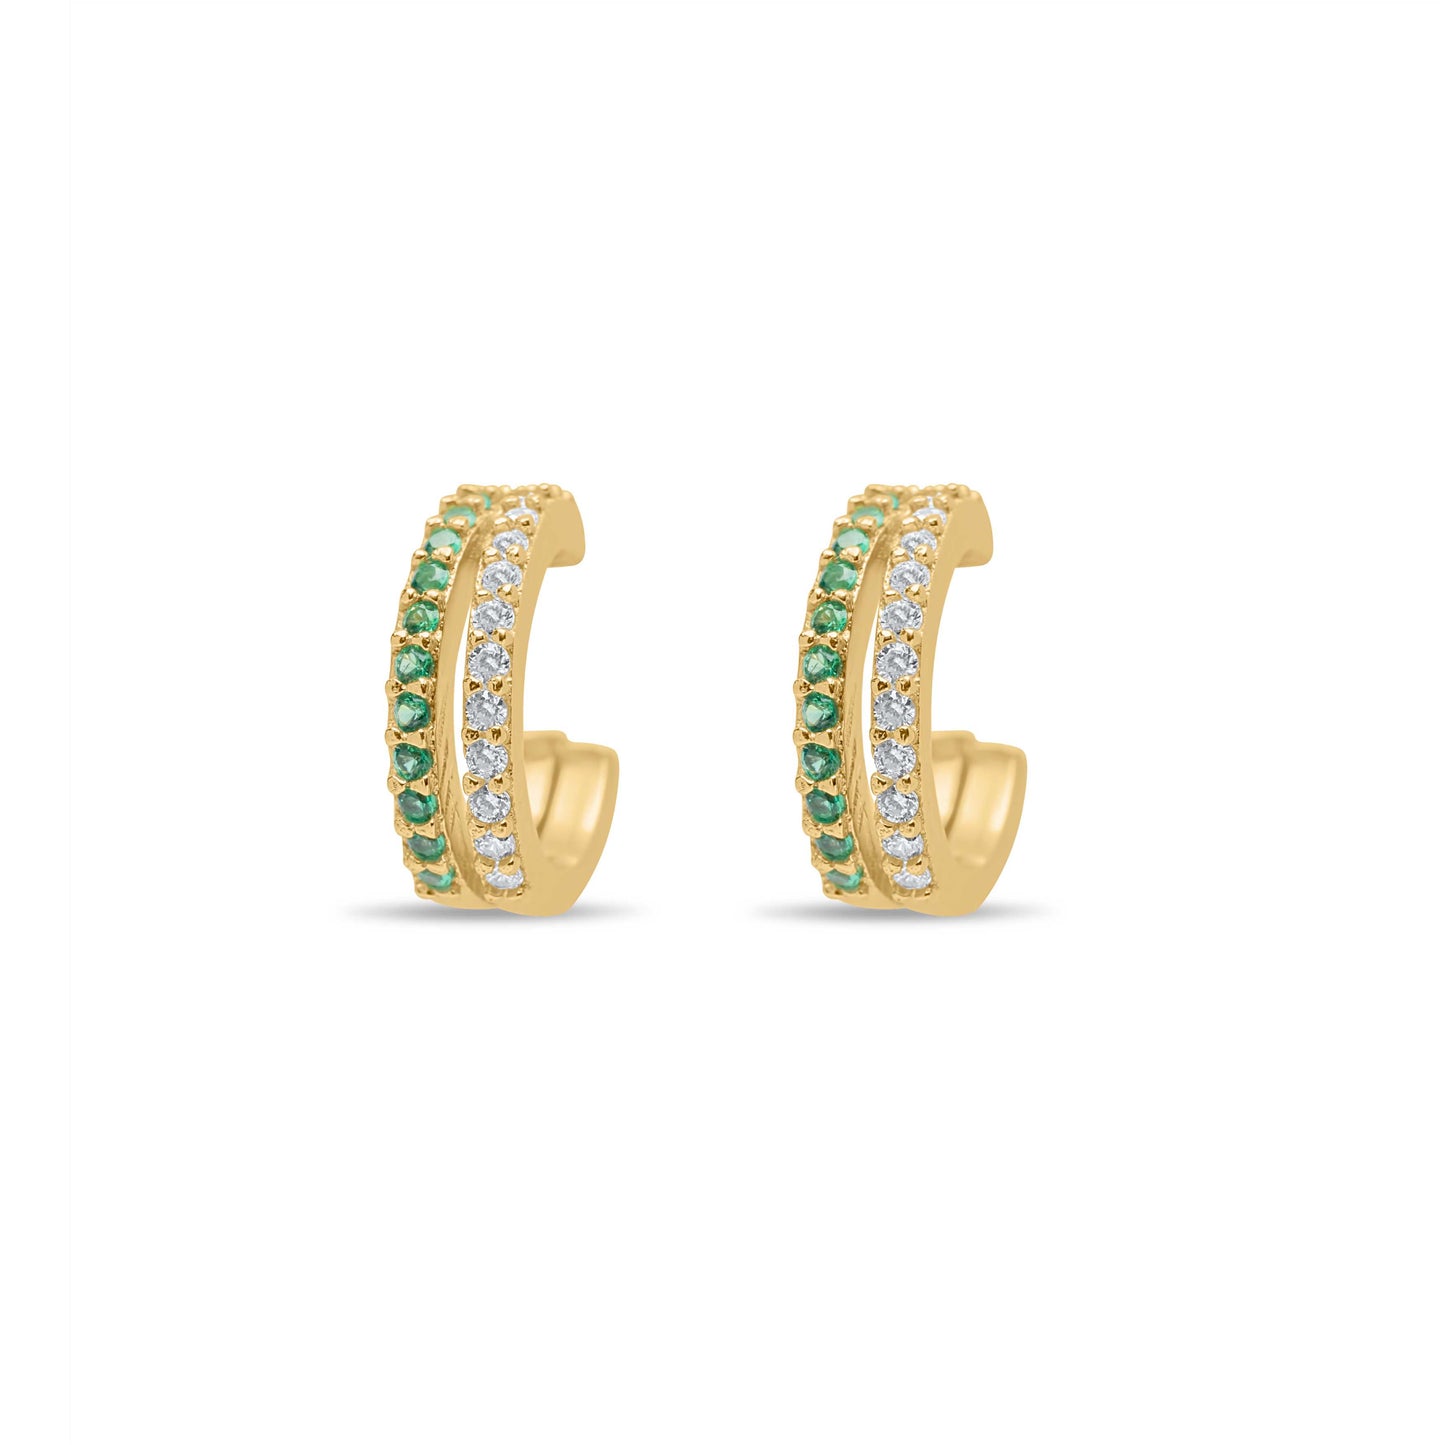 Emerald & White Double Pair Hoops earrings - Gold Plated